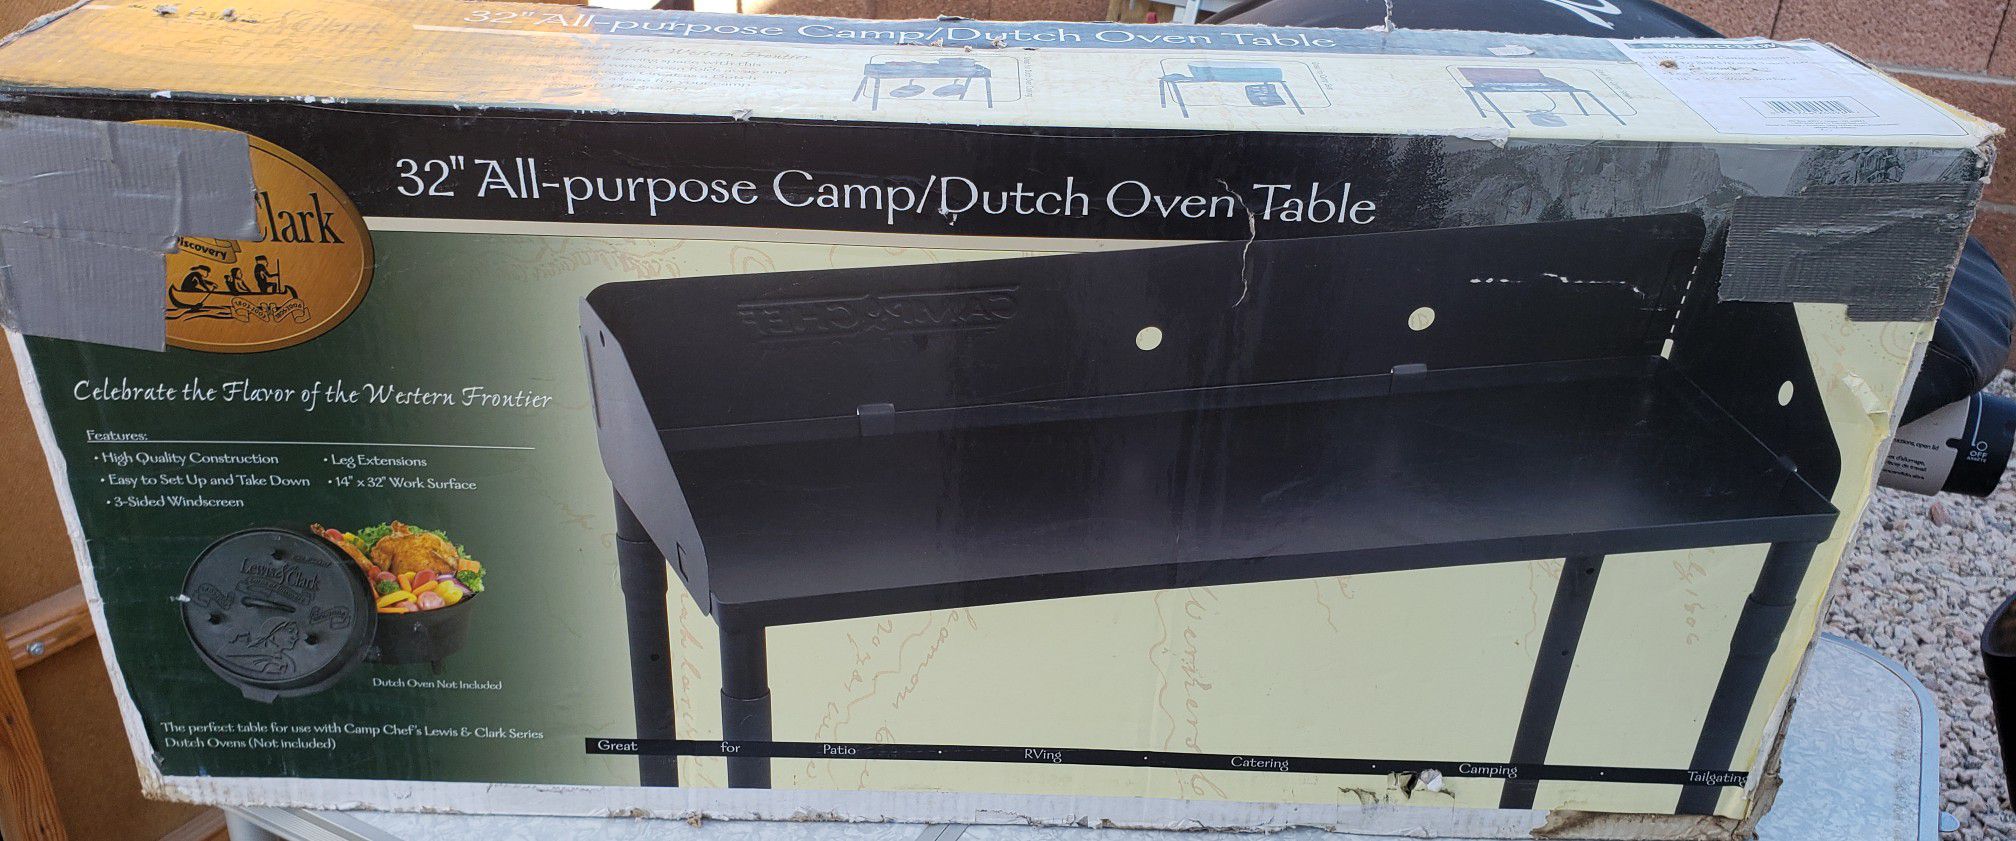 Dutch Oven Table  Dutch oven table, Dutch oven, Dutch oven camping